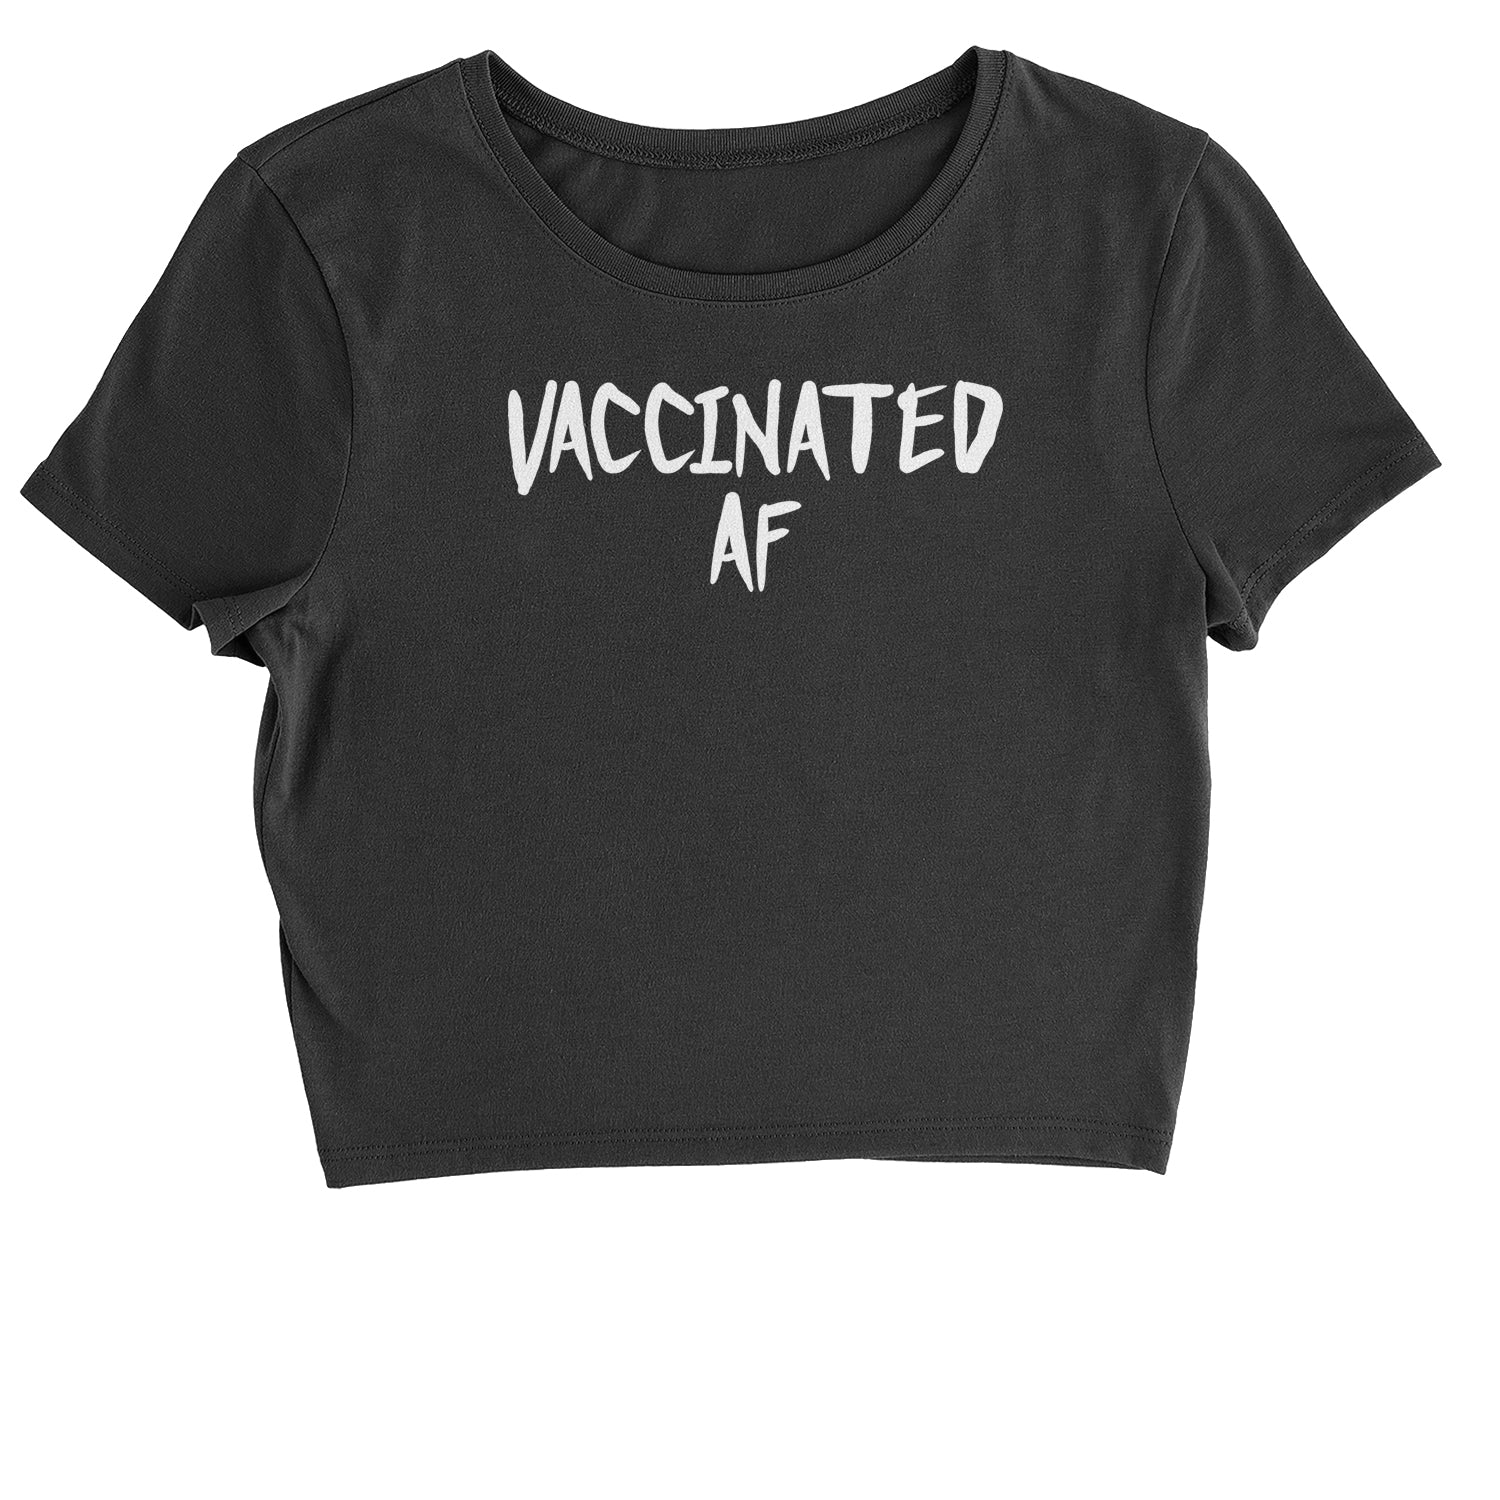 Vaccinated AF Pro Vaccine Funny Vaccination Health Cropped T-Shirt moderna, pfizer, vaccine, vax, vaxx by Expression Tees